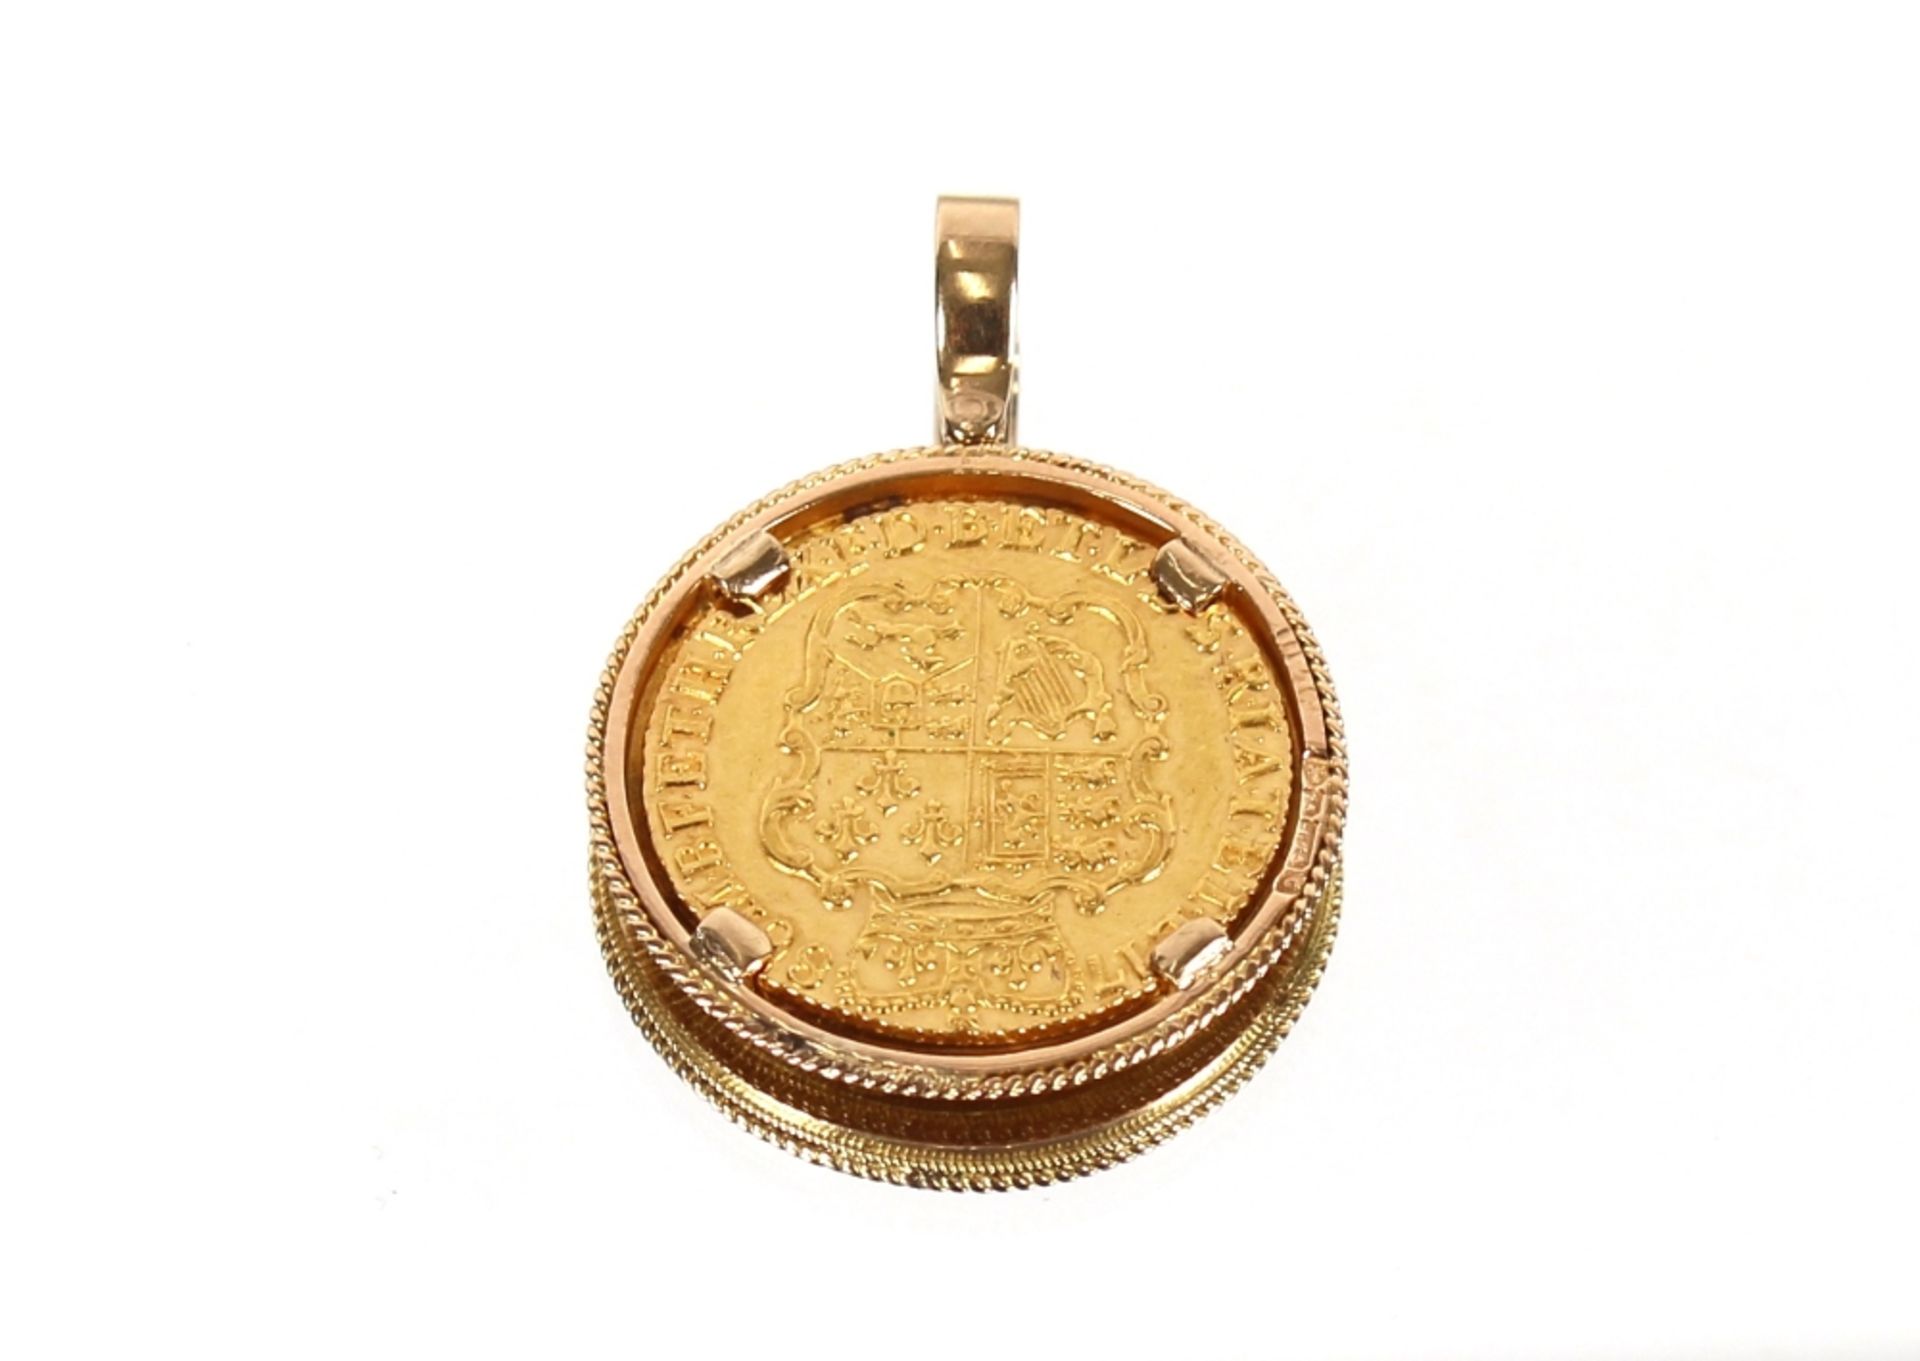 A 1786 George III Guinea in 15ct gold mount, 11.5g